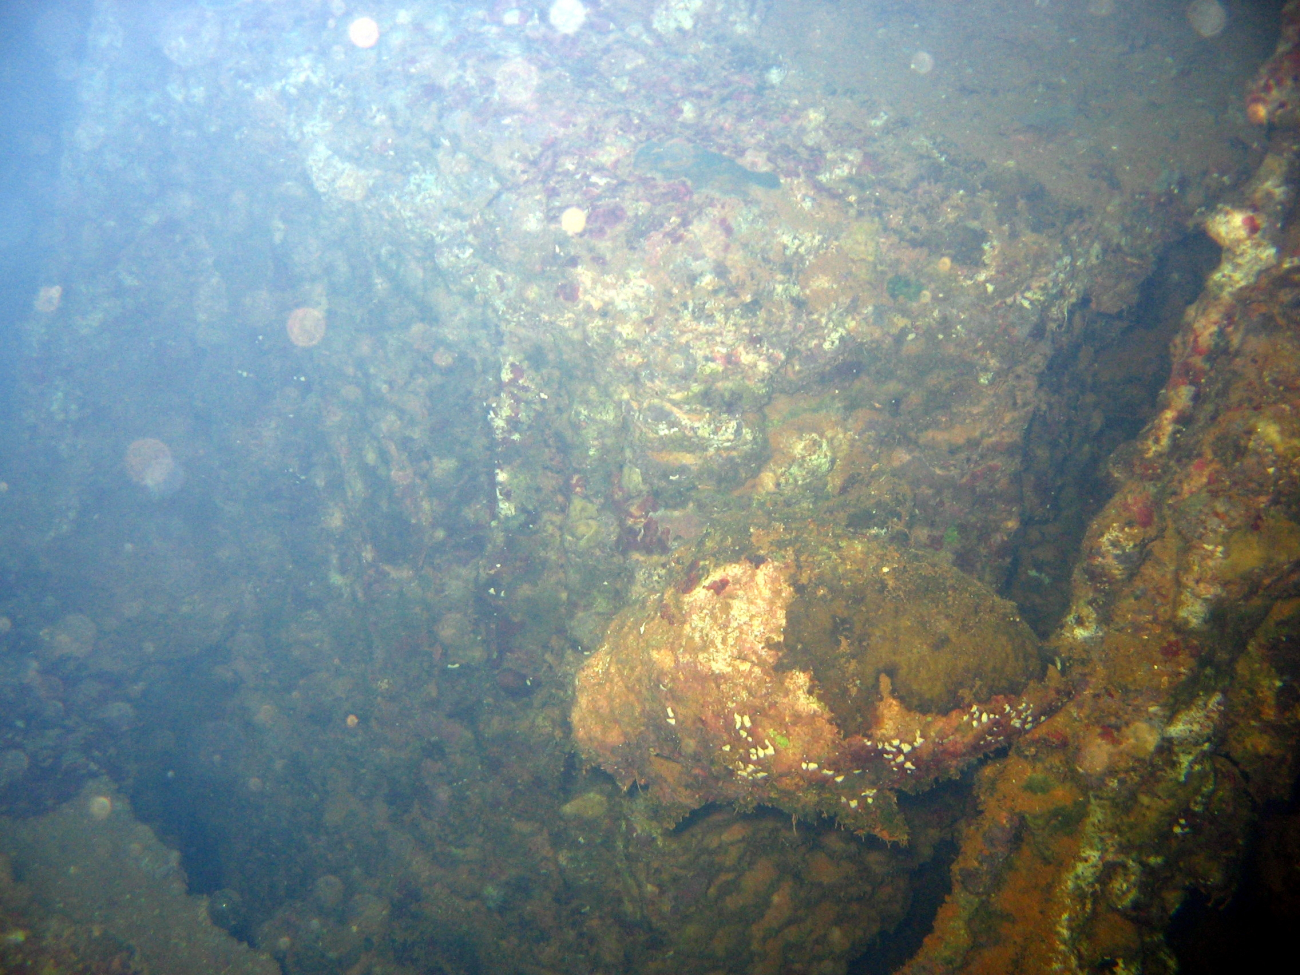 Remains of a truck on the Hoku Maru